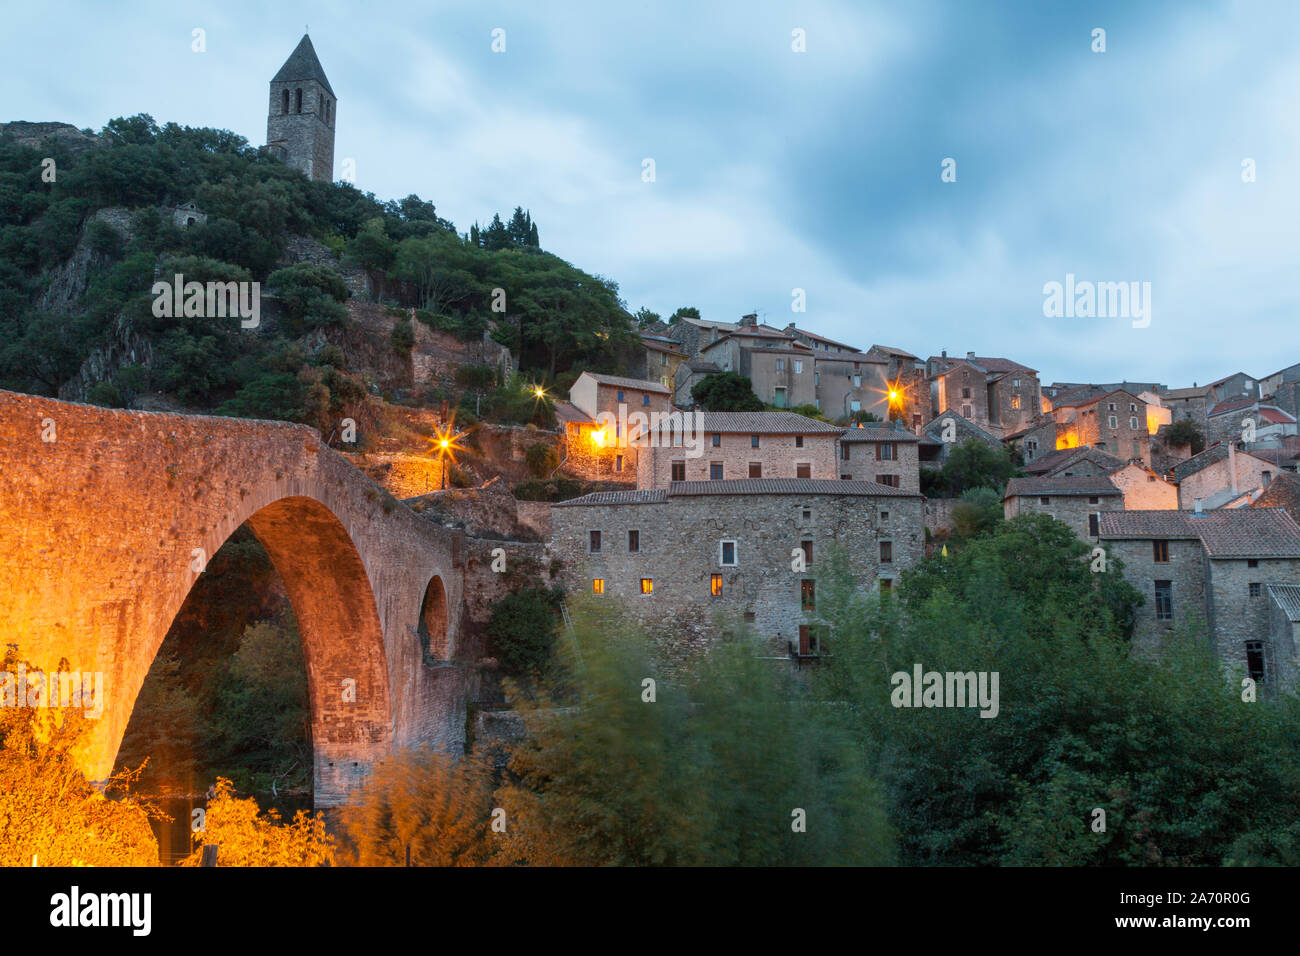 France, Languedoc-Roussilon, Olargues, Pont du Diable bridge and the pretty hill top village of Olargues in the Black Mountains at dusk. Stock Photo